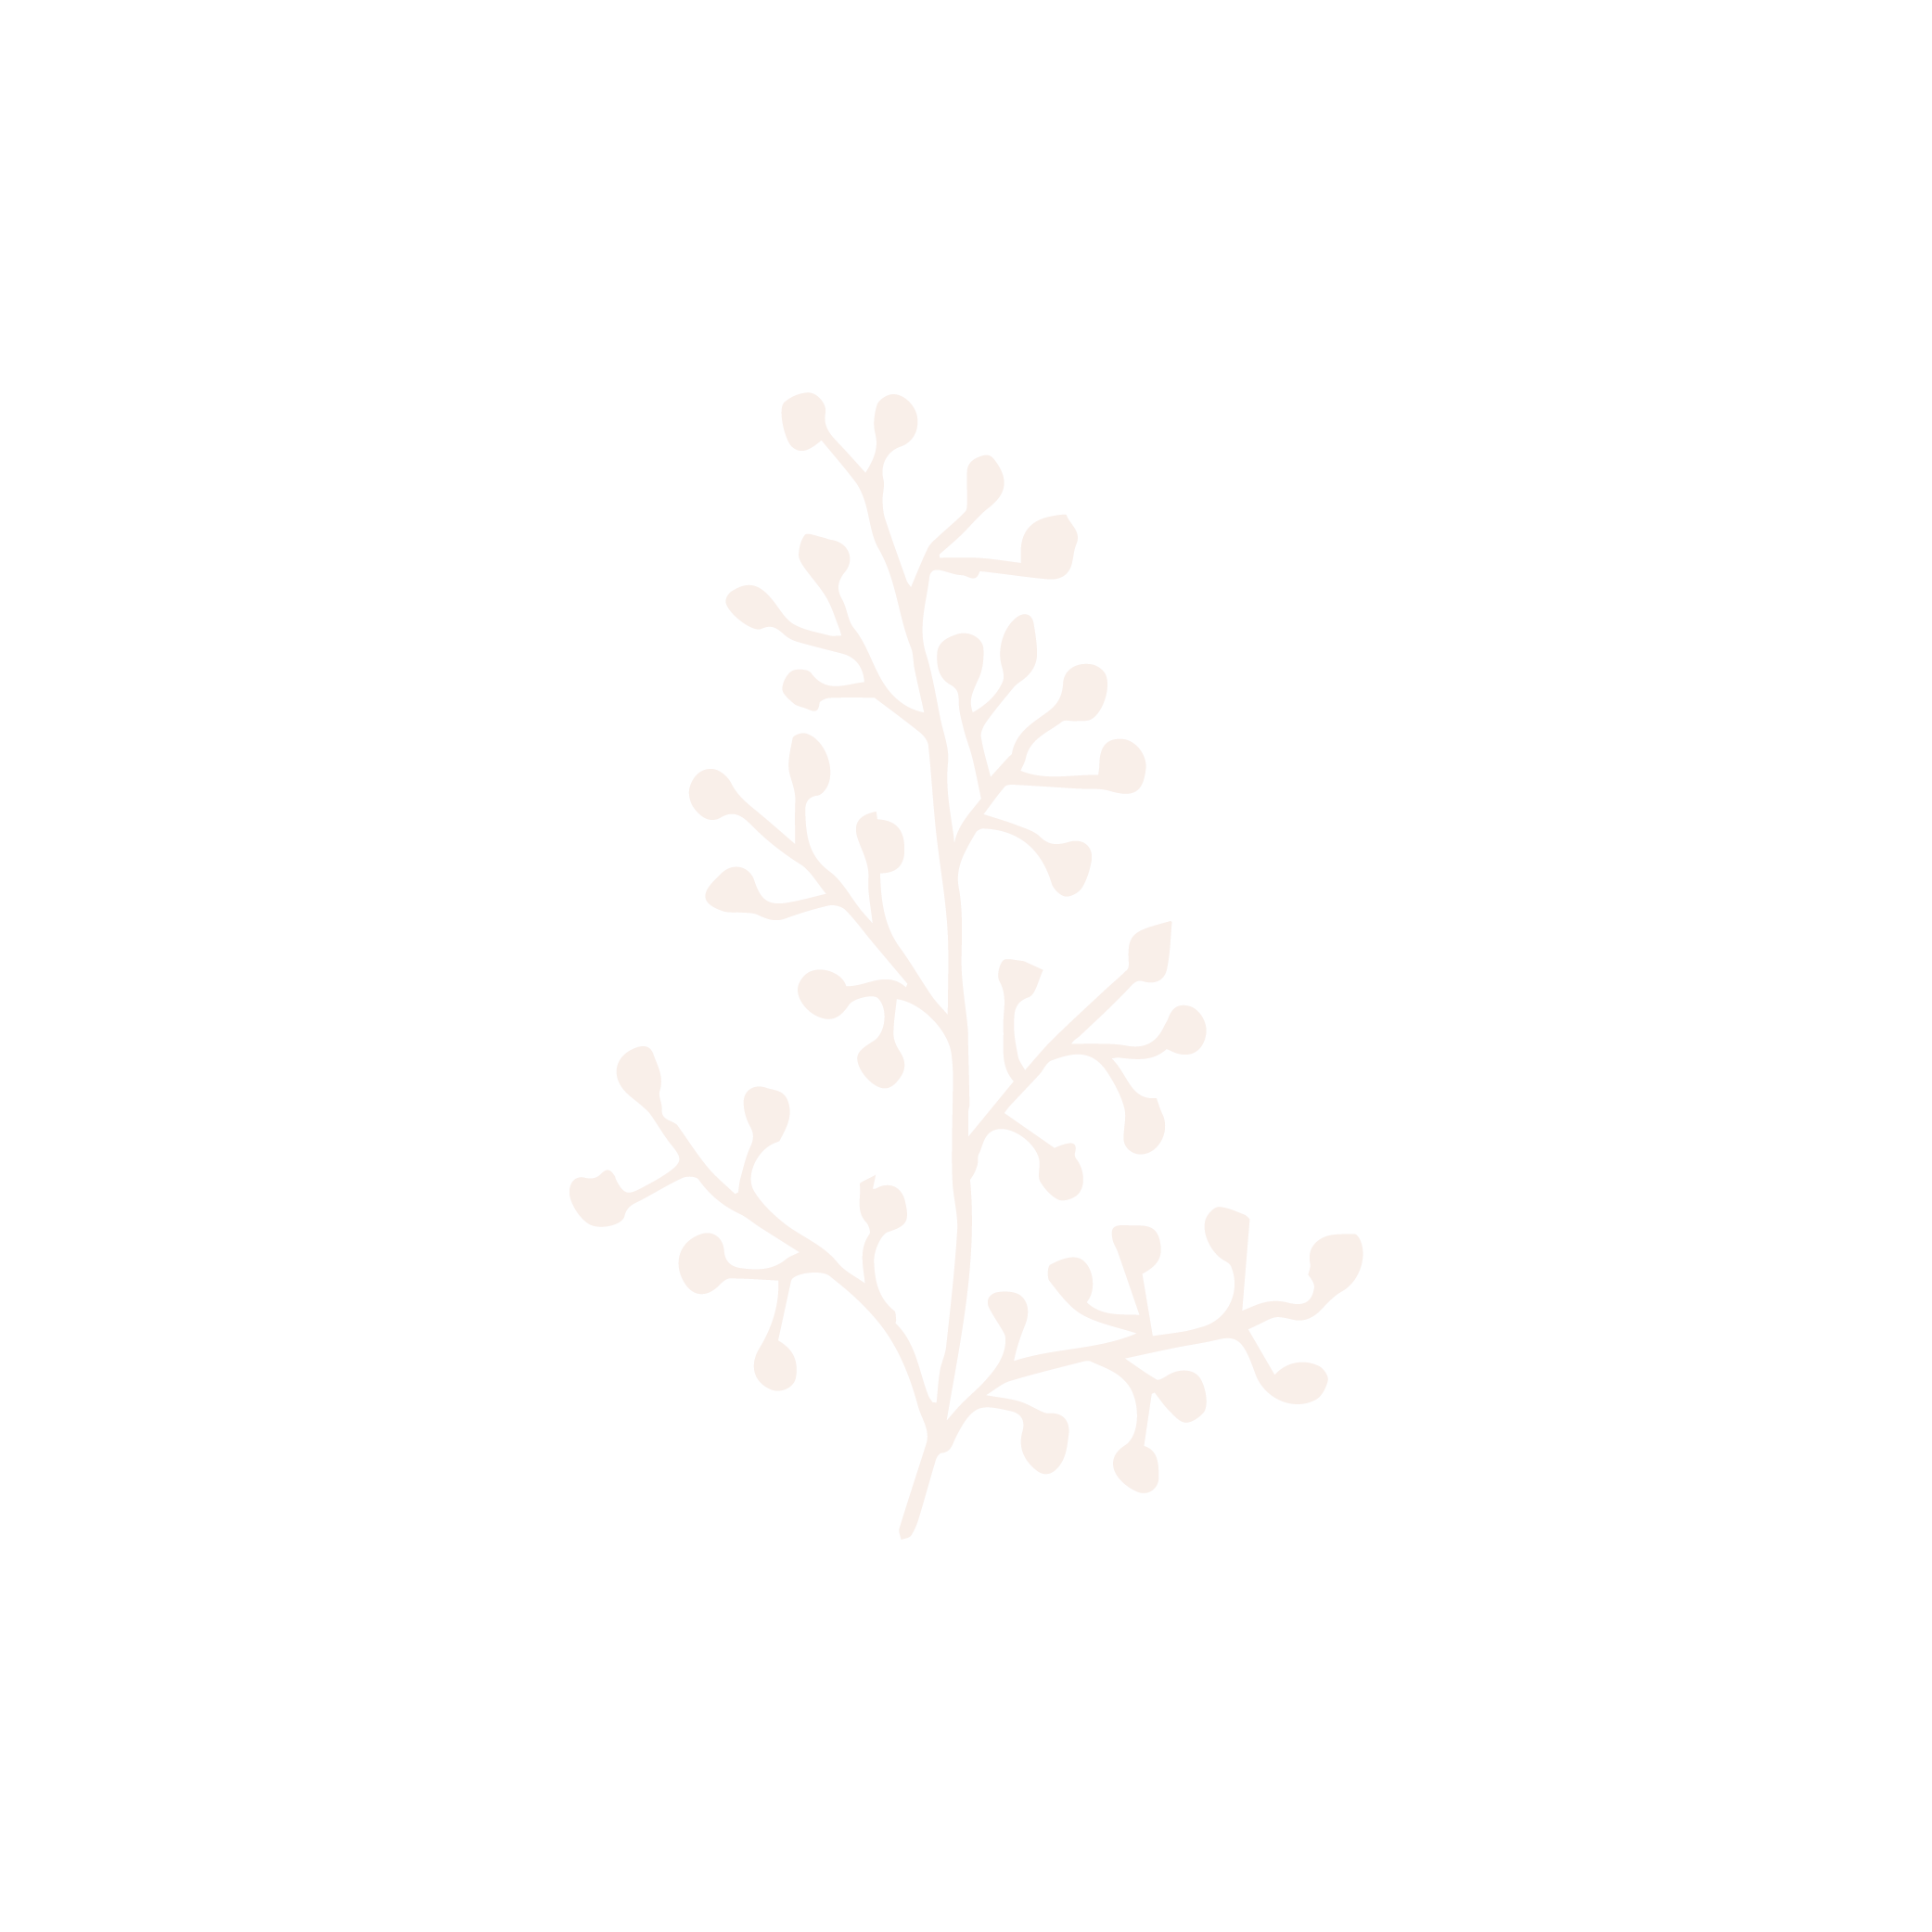 hand-drawn floral